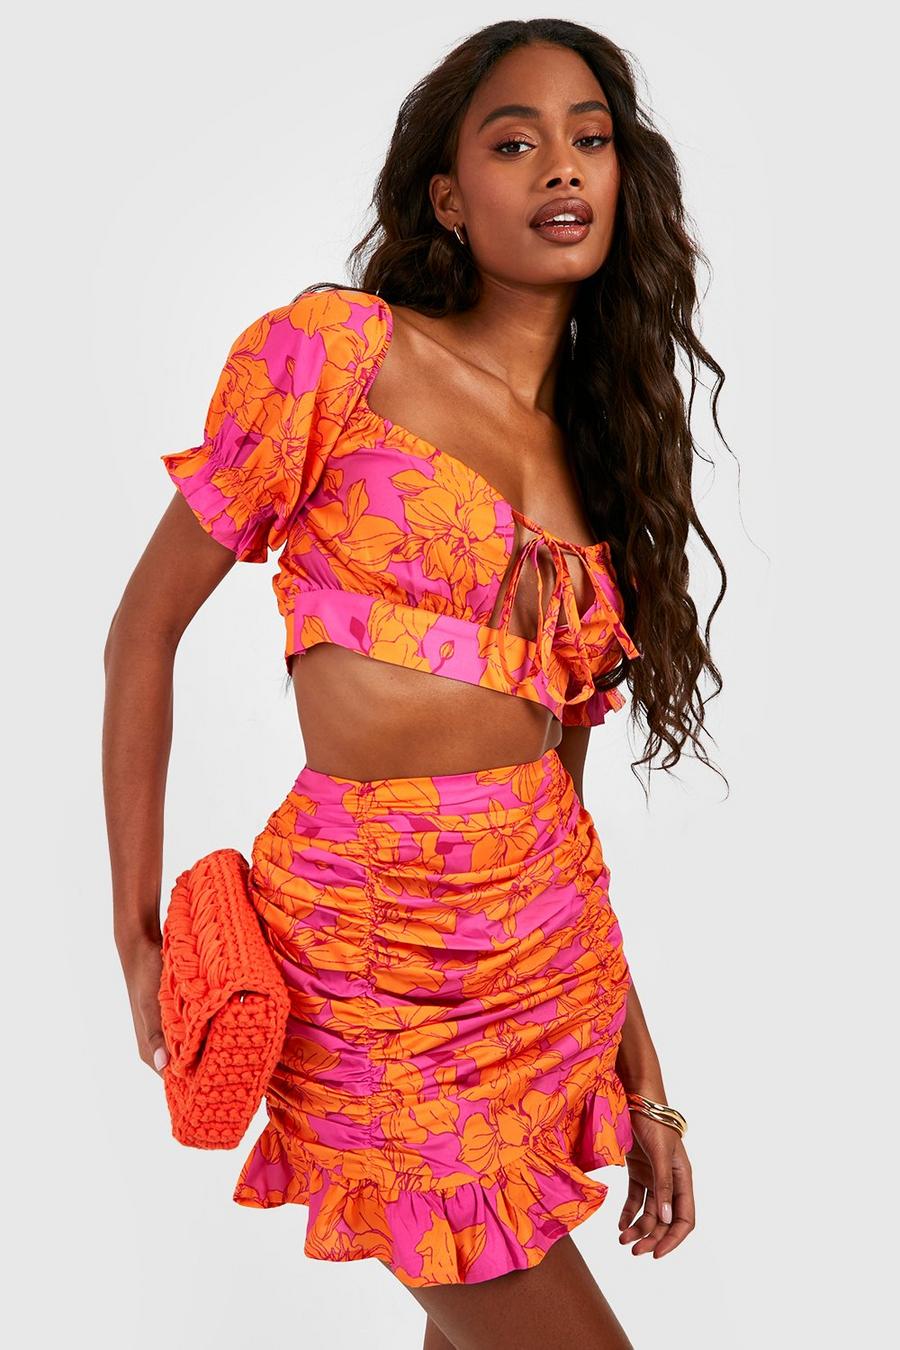 Ruched Mini Skirt And Top Co Ord Set Neon Pink Festival Rave Outfit –